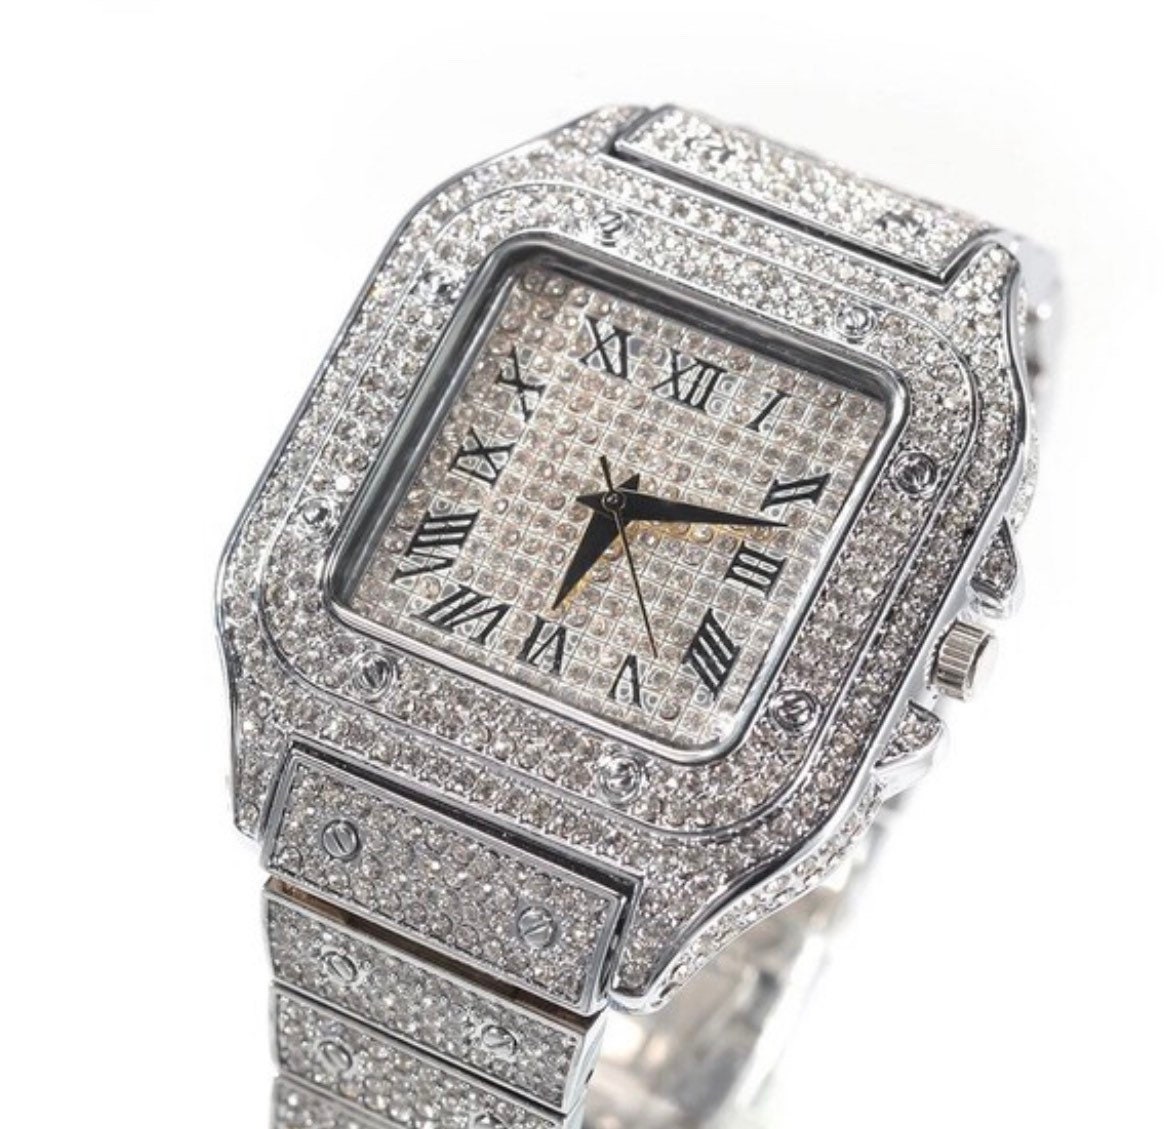 Iced Out Square Watch Square Full Iced Out Men Watches - Etsy